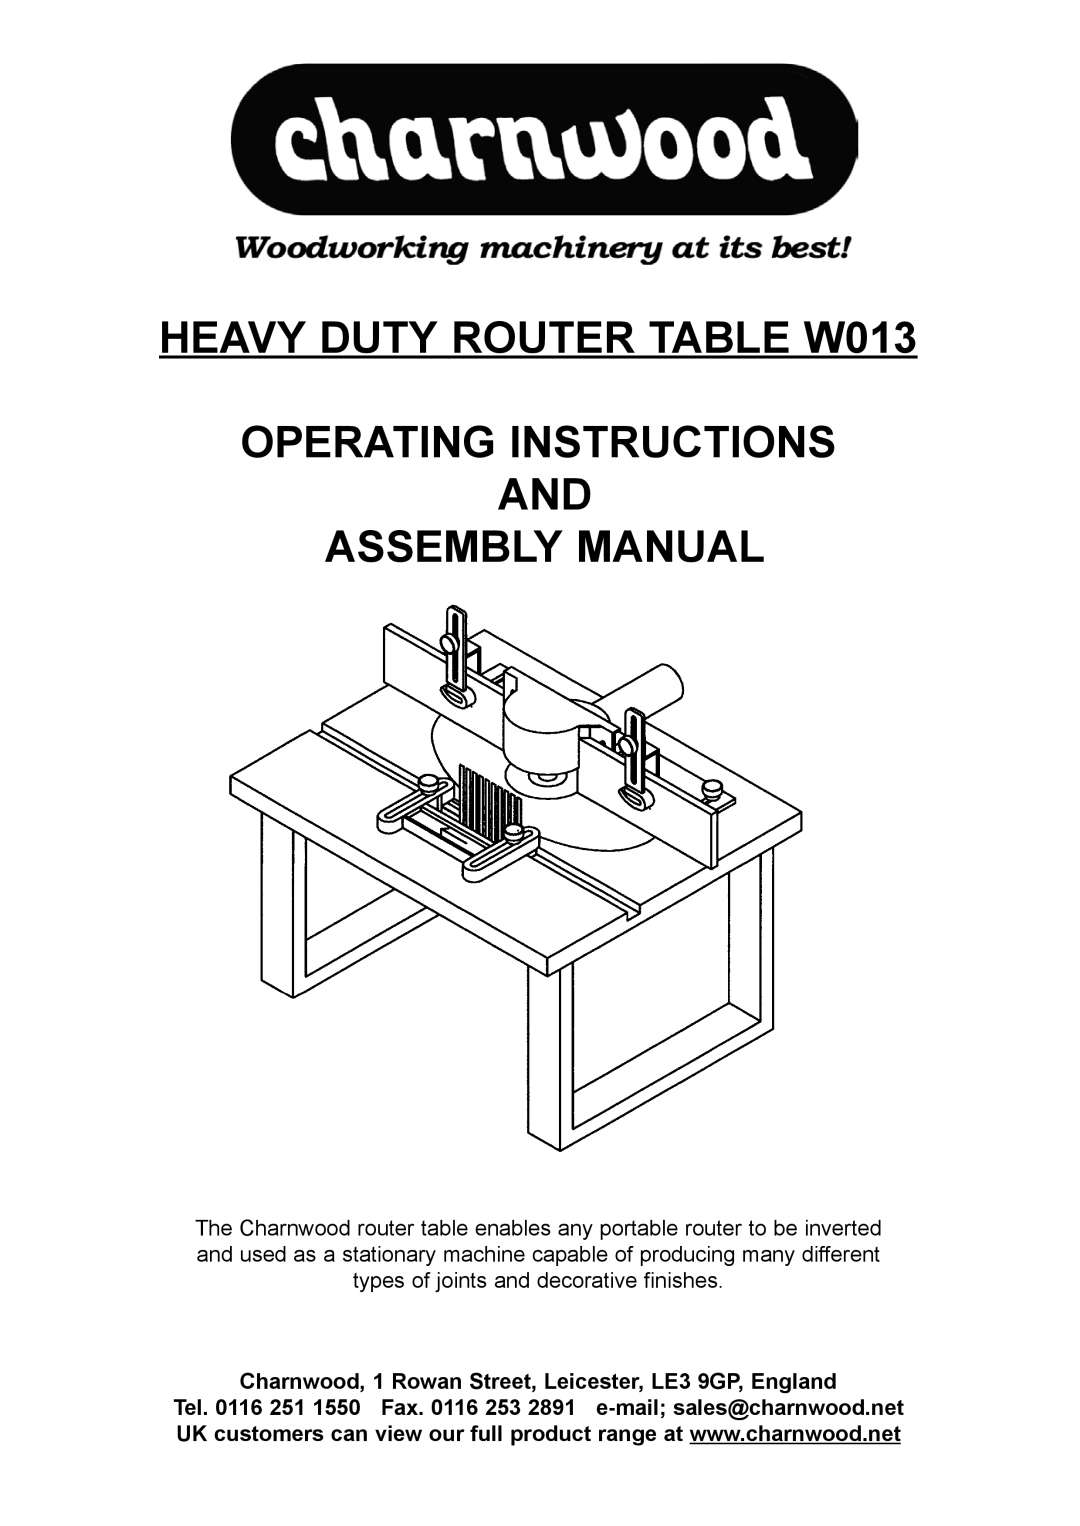 Charnwood operating instructions Charnwood, 1 Rowan Street, Leicester, LE3 9GP, England, HEAVY DUTY ROUTER TABLE W013 